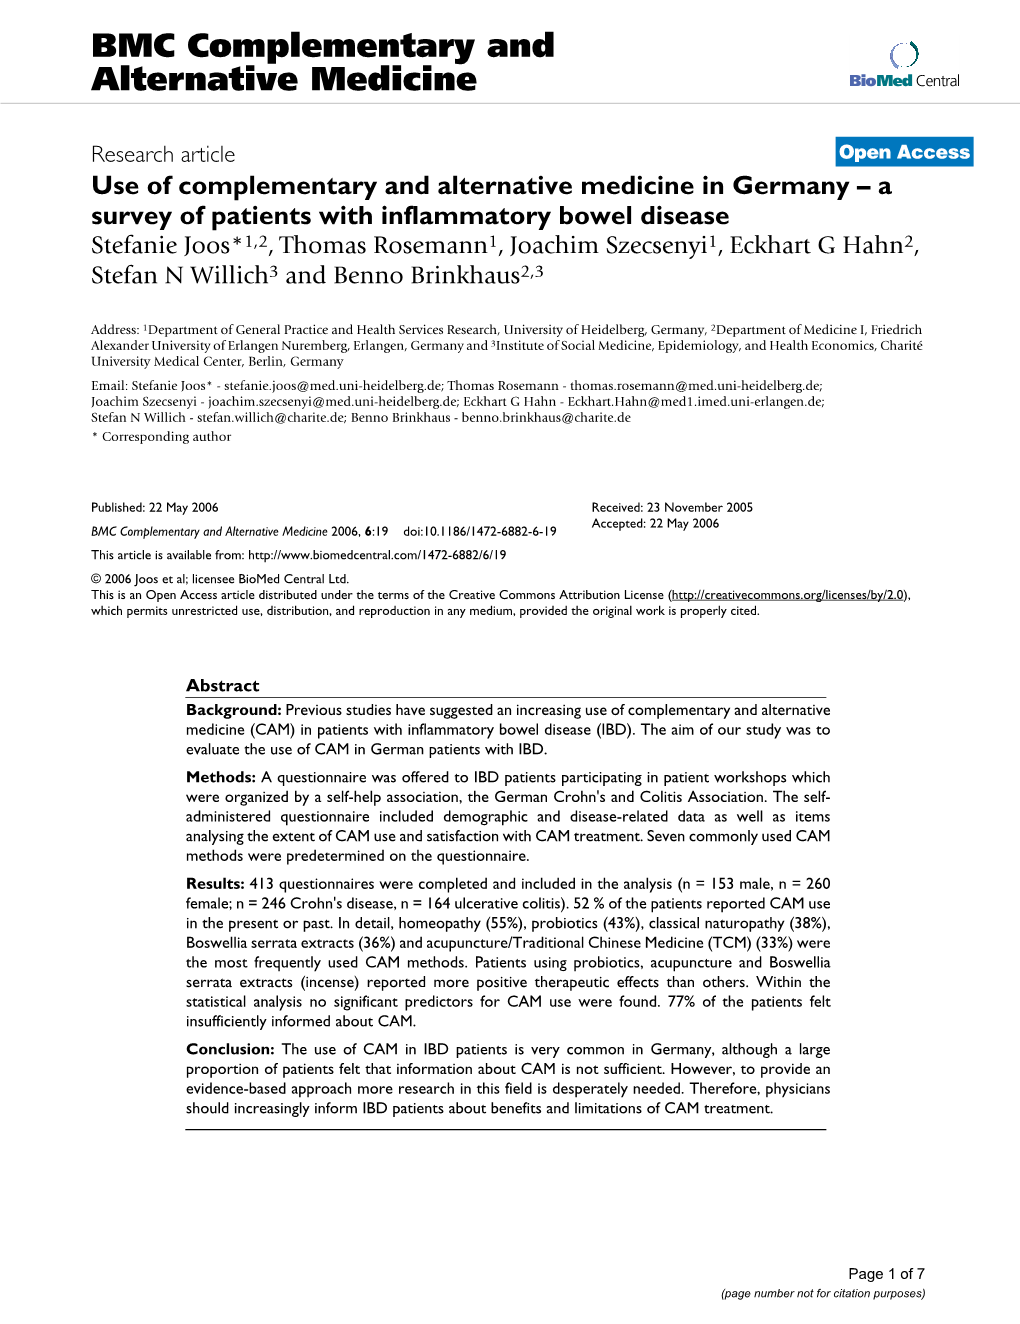 Use of Complementary and Alternative Medicine in Germany–A Survey Of